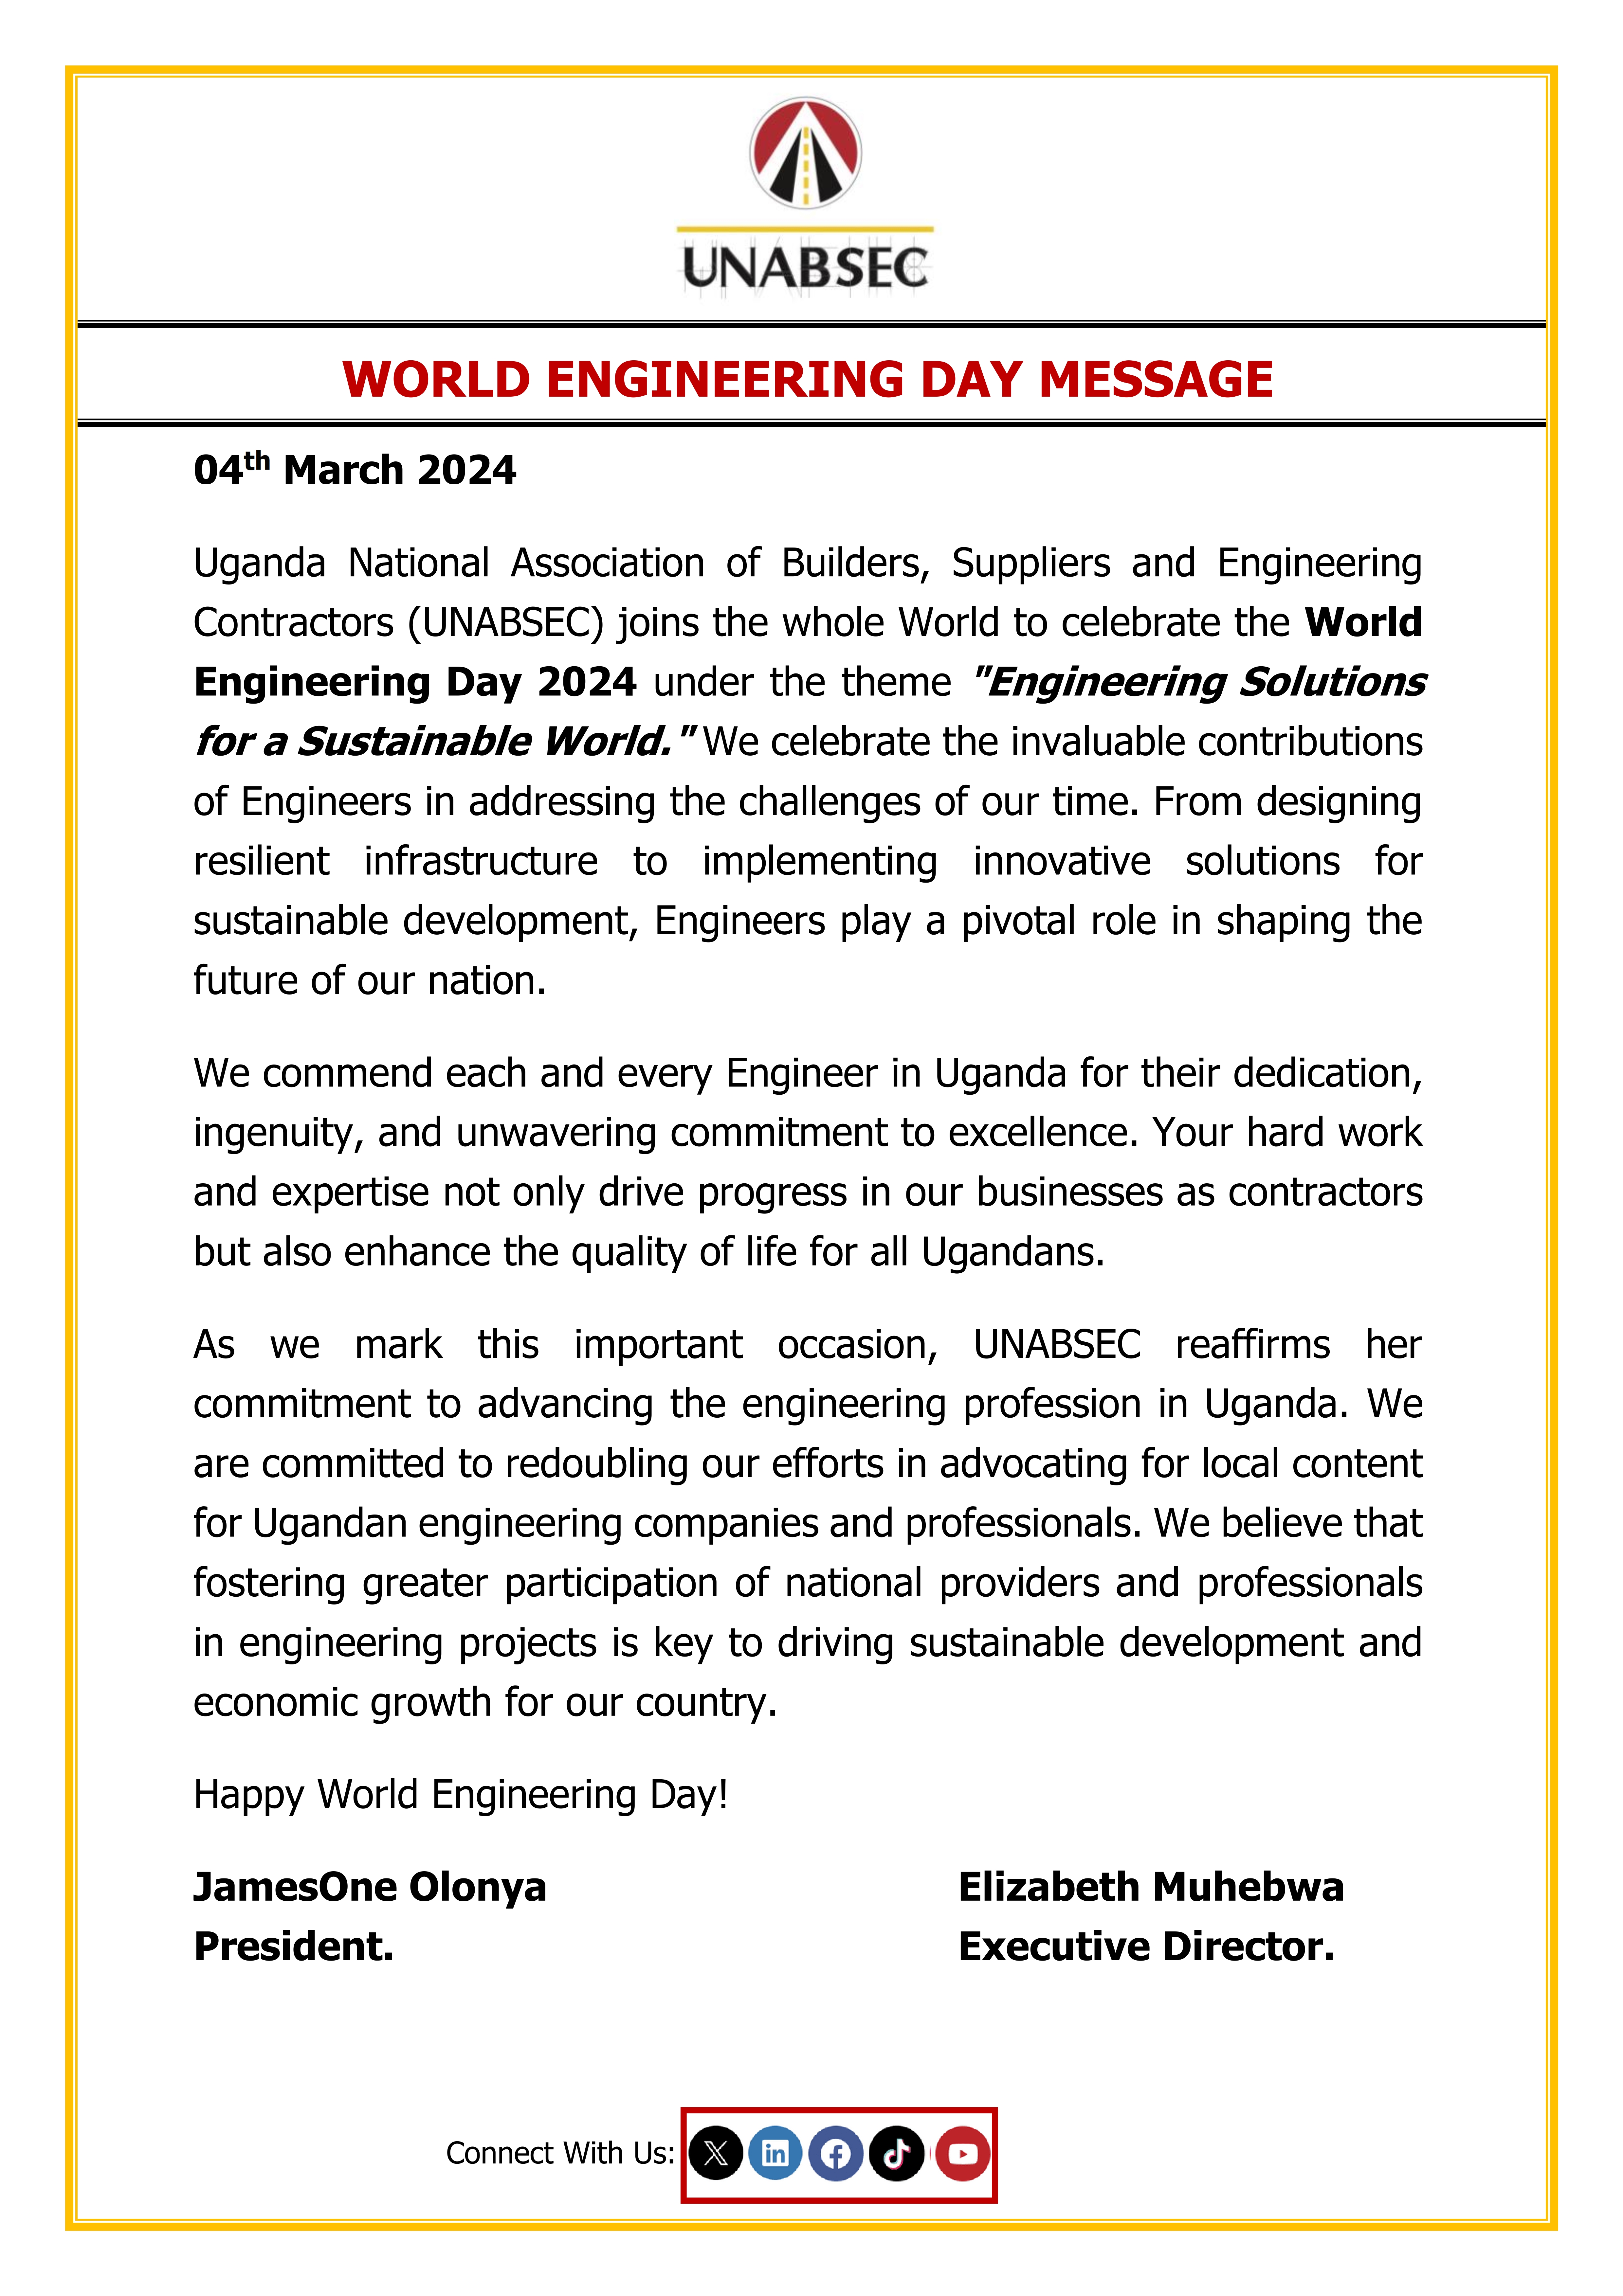 UNABSEC MESSAGE ON WORLD ENGINEERING DAY 2024